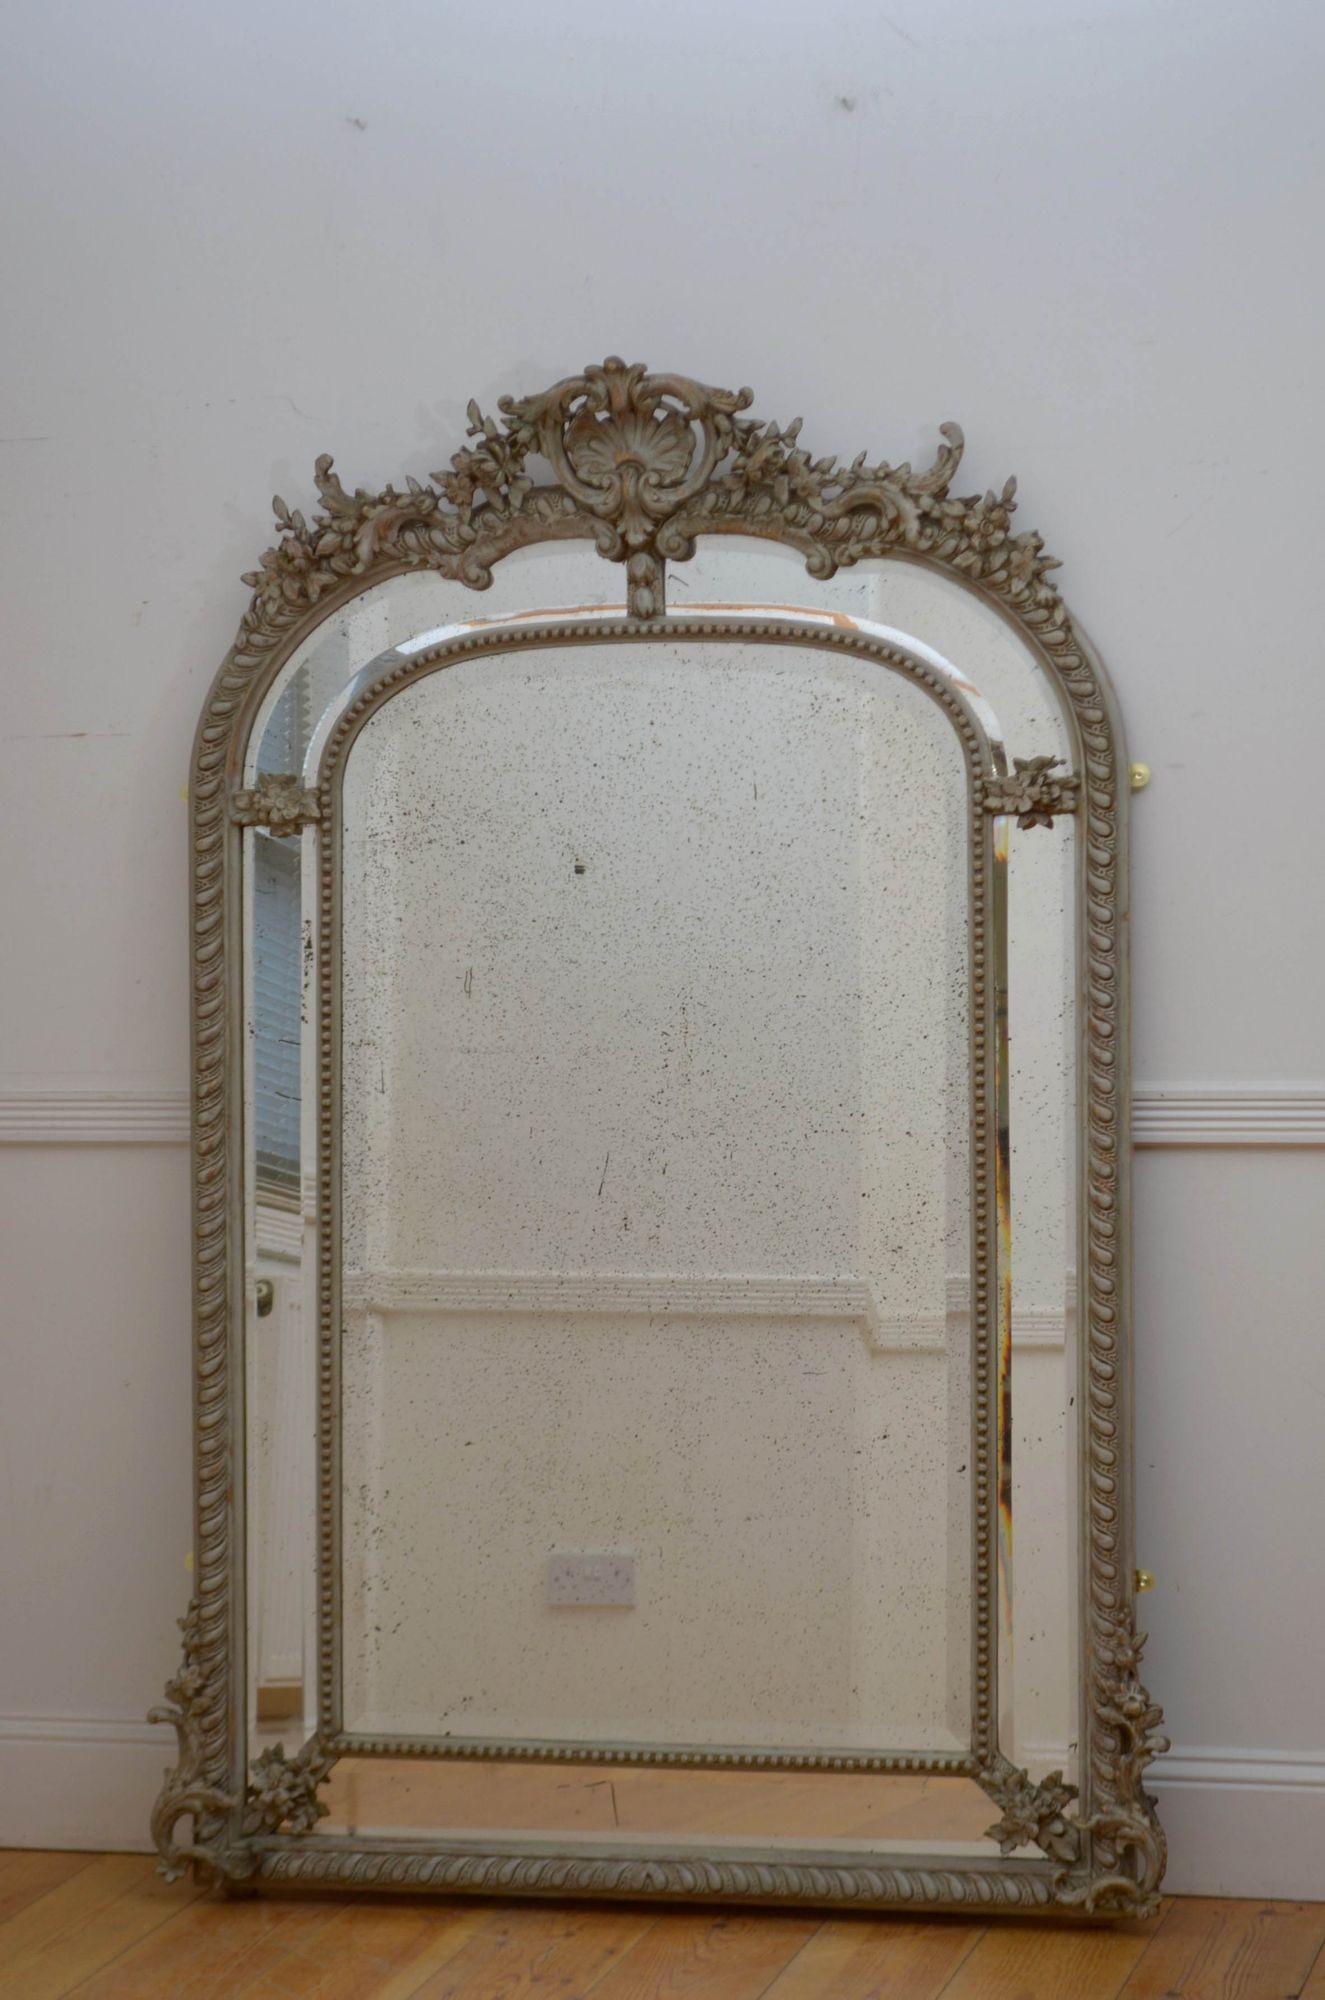 Sn5473 Attractive antique 19th century painted wall mirror, having original foxed, bevelled edge glass and fine shell crest to the centre flanked by foliage scrolls, all in beaded inner frame and gadrooned outer frame with decorative floral motifs